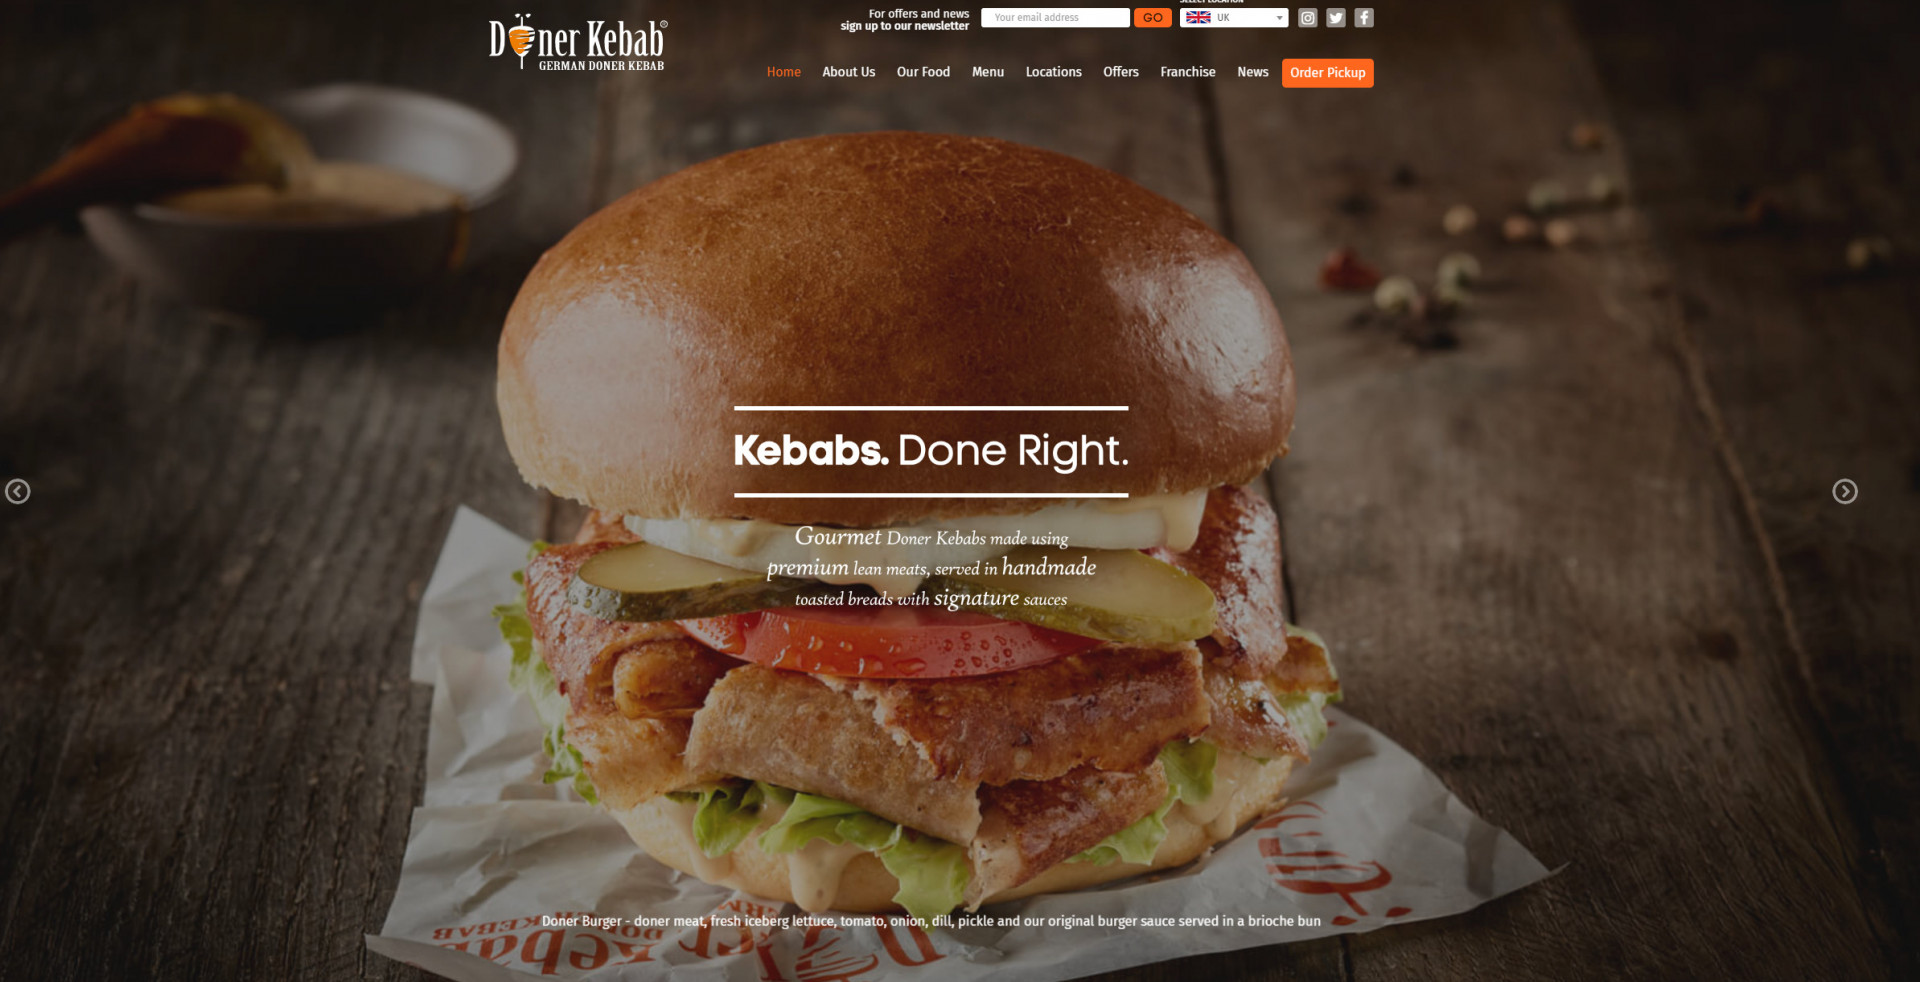 One of the best restaurant websites for businesses that serve kebabs